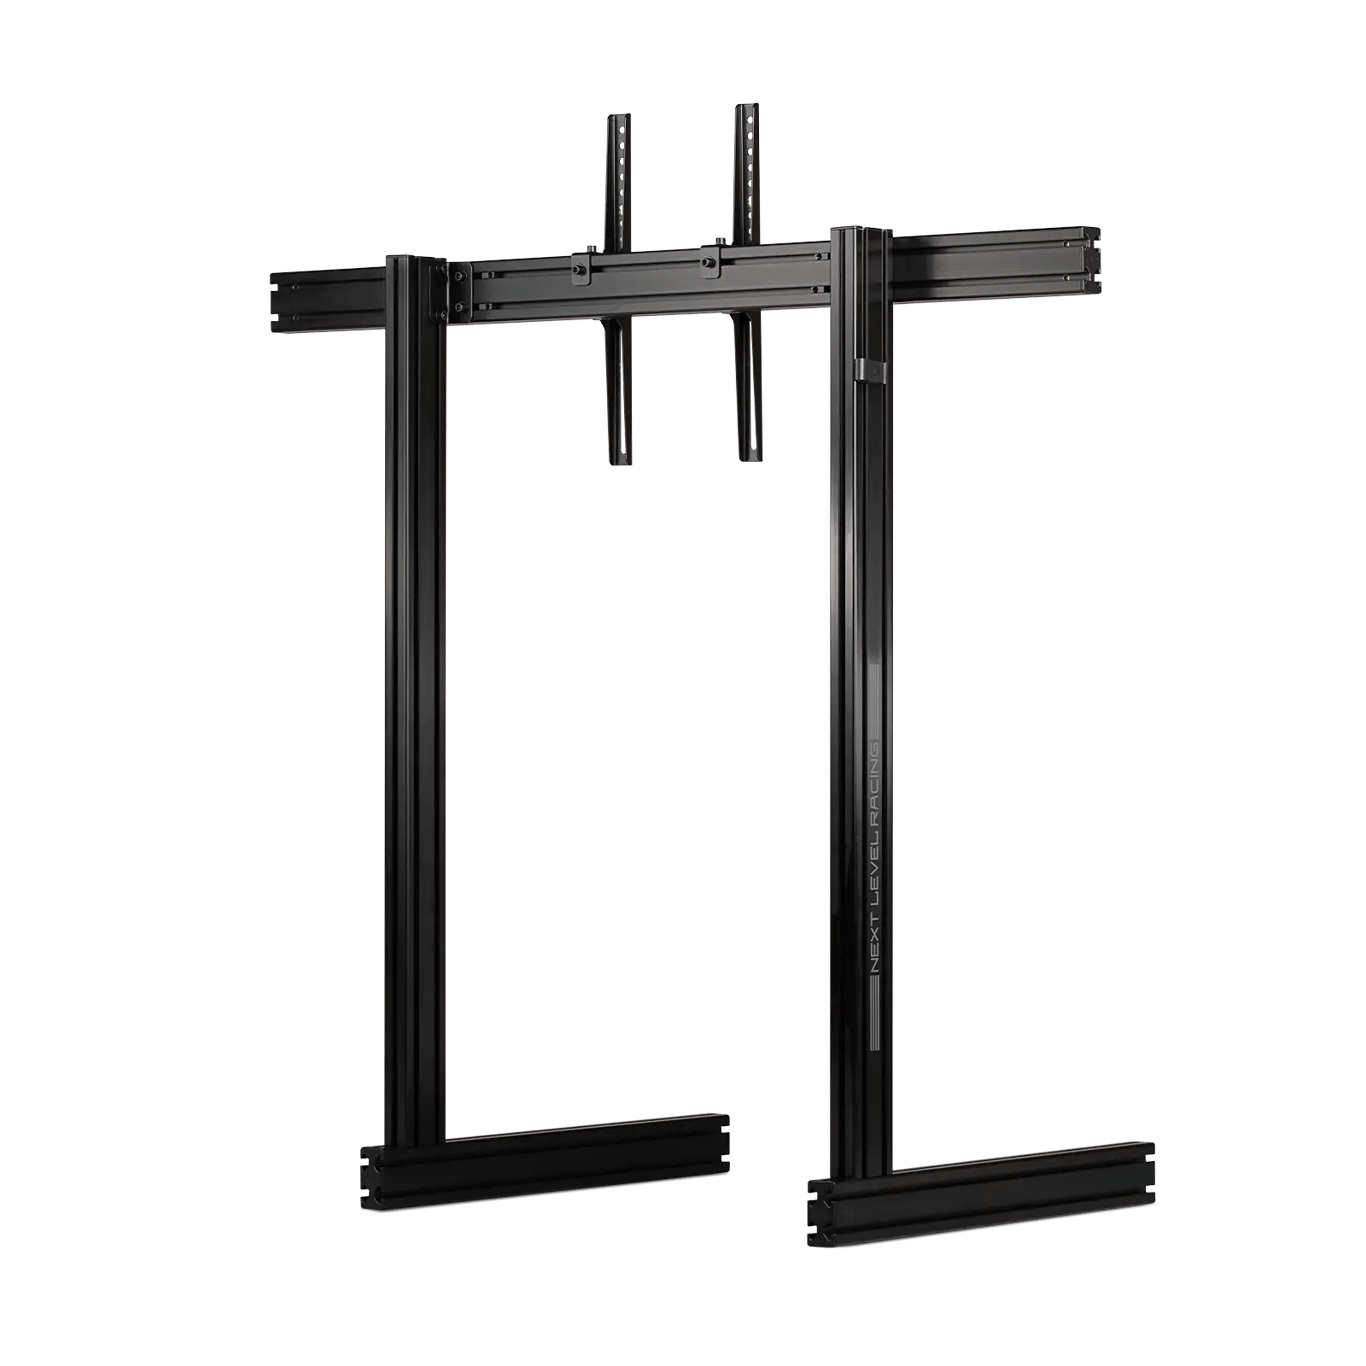 Next Level Racing ELITE Free Standing Single Monitor Stand Black -1